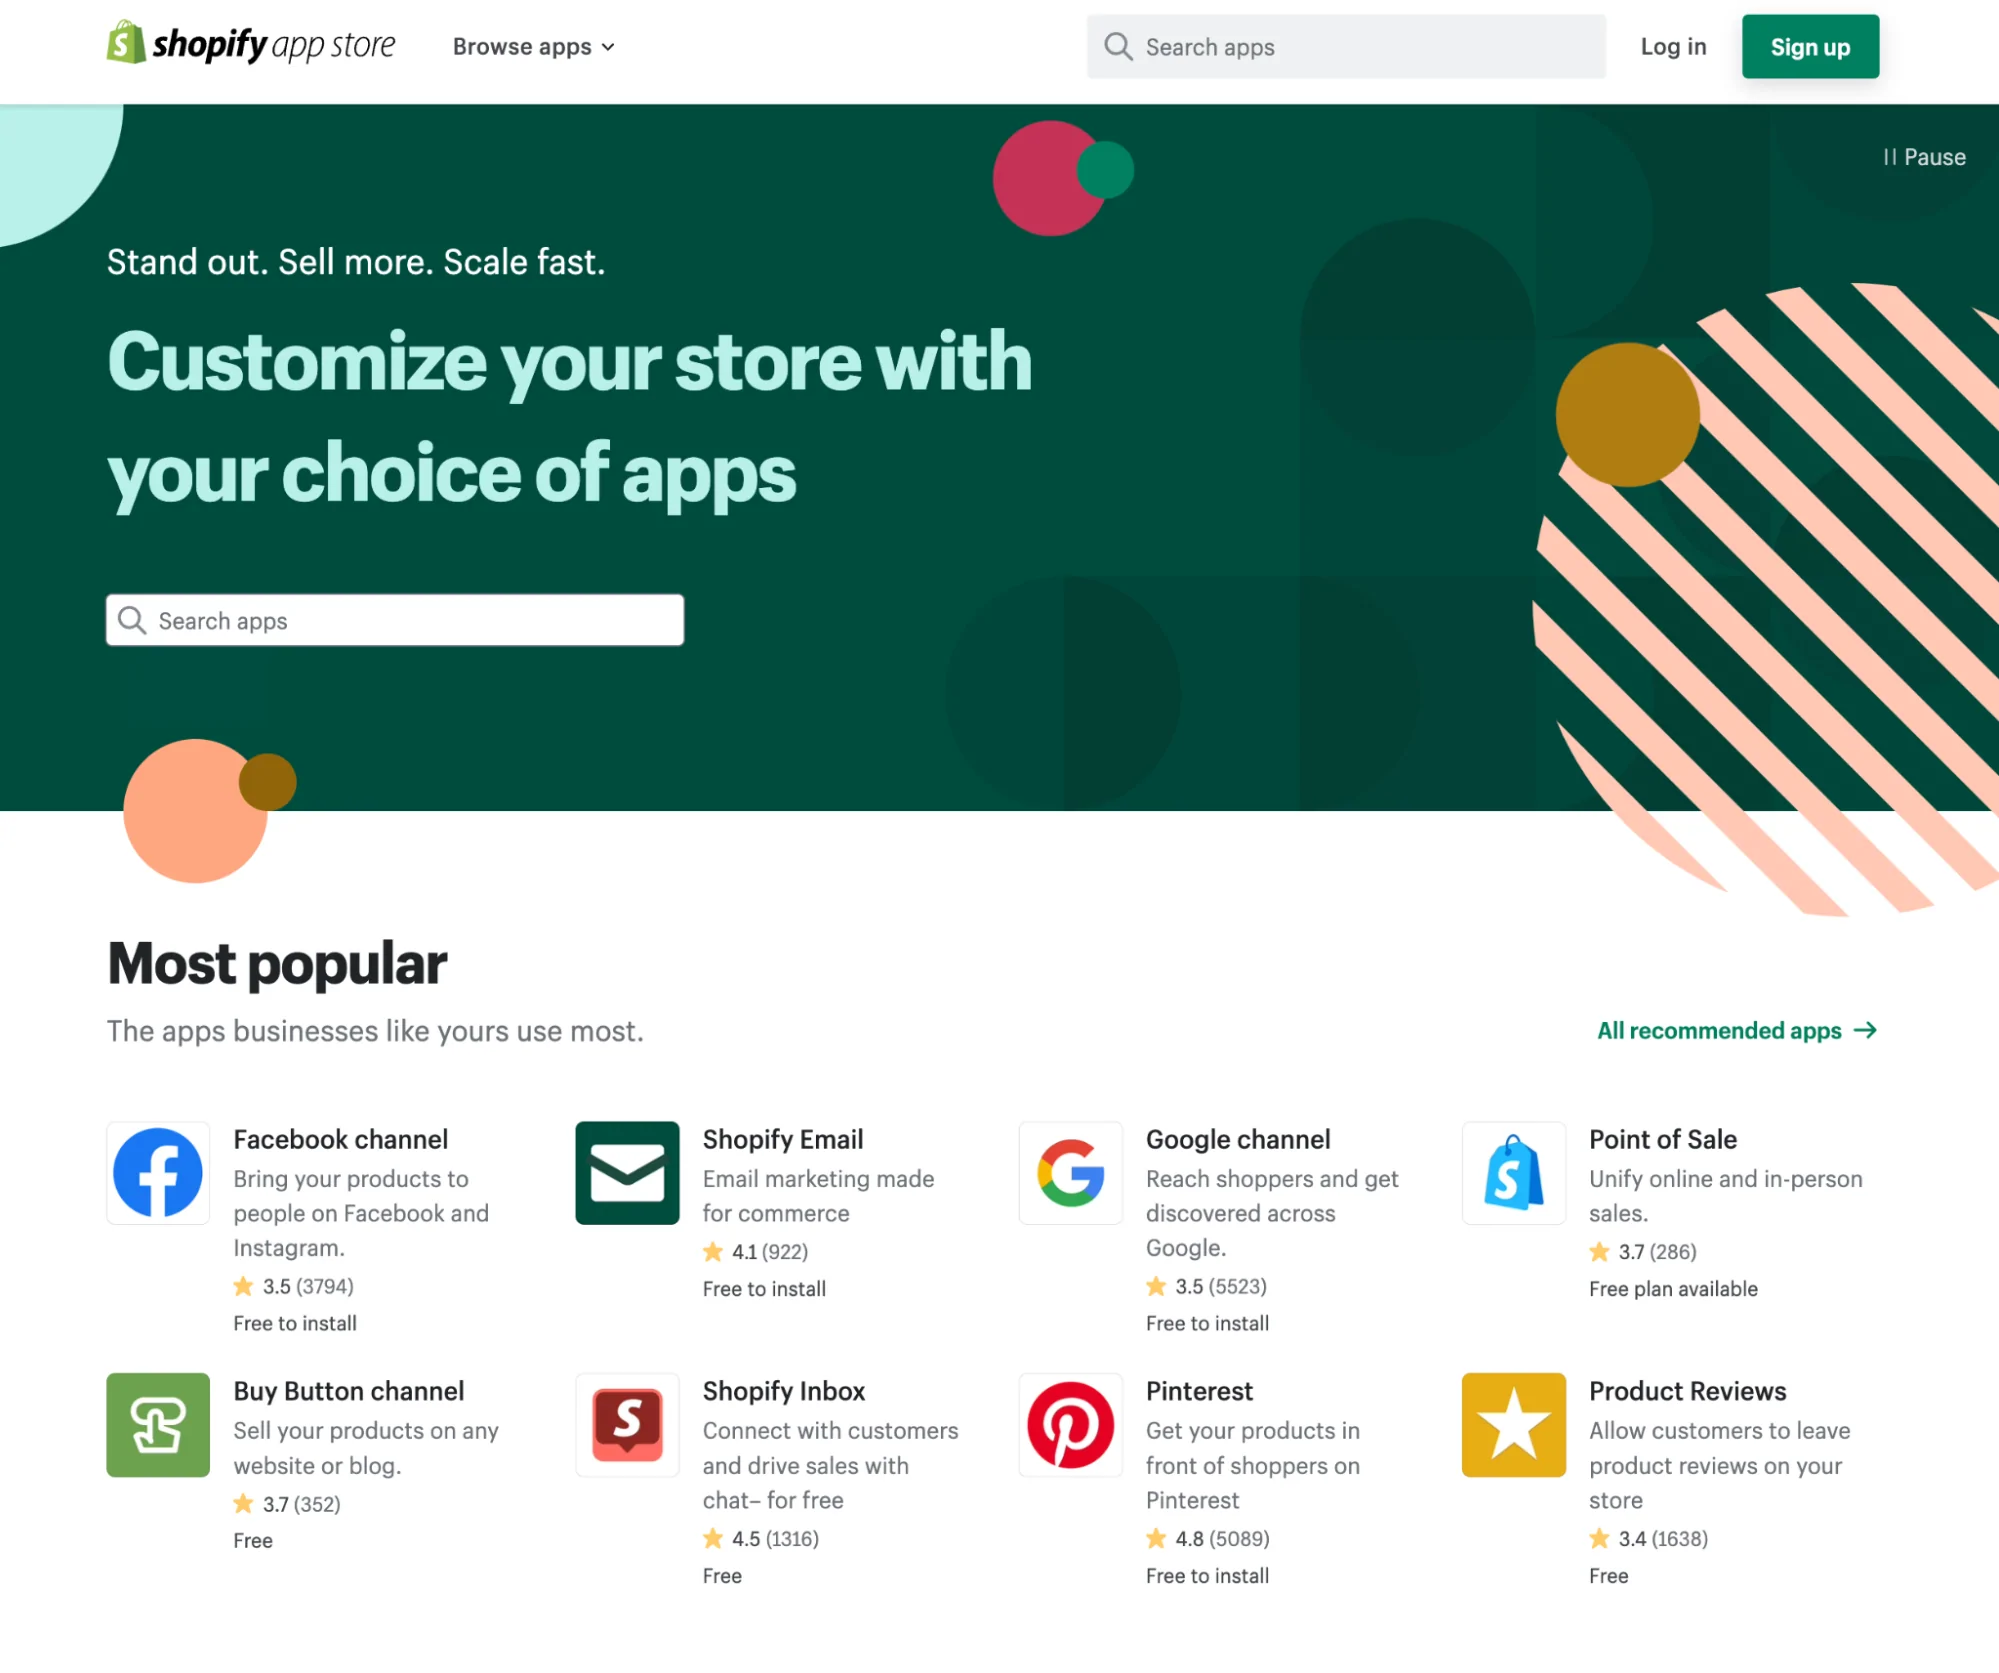 Shopify app store image